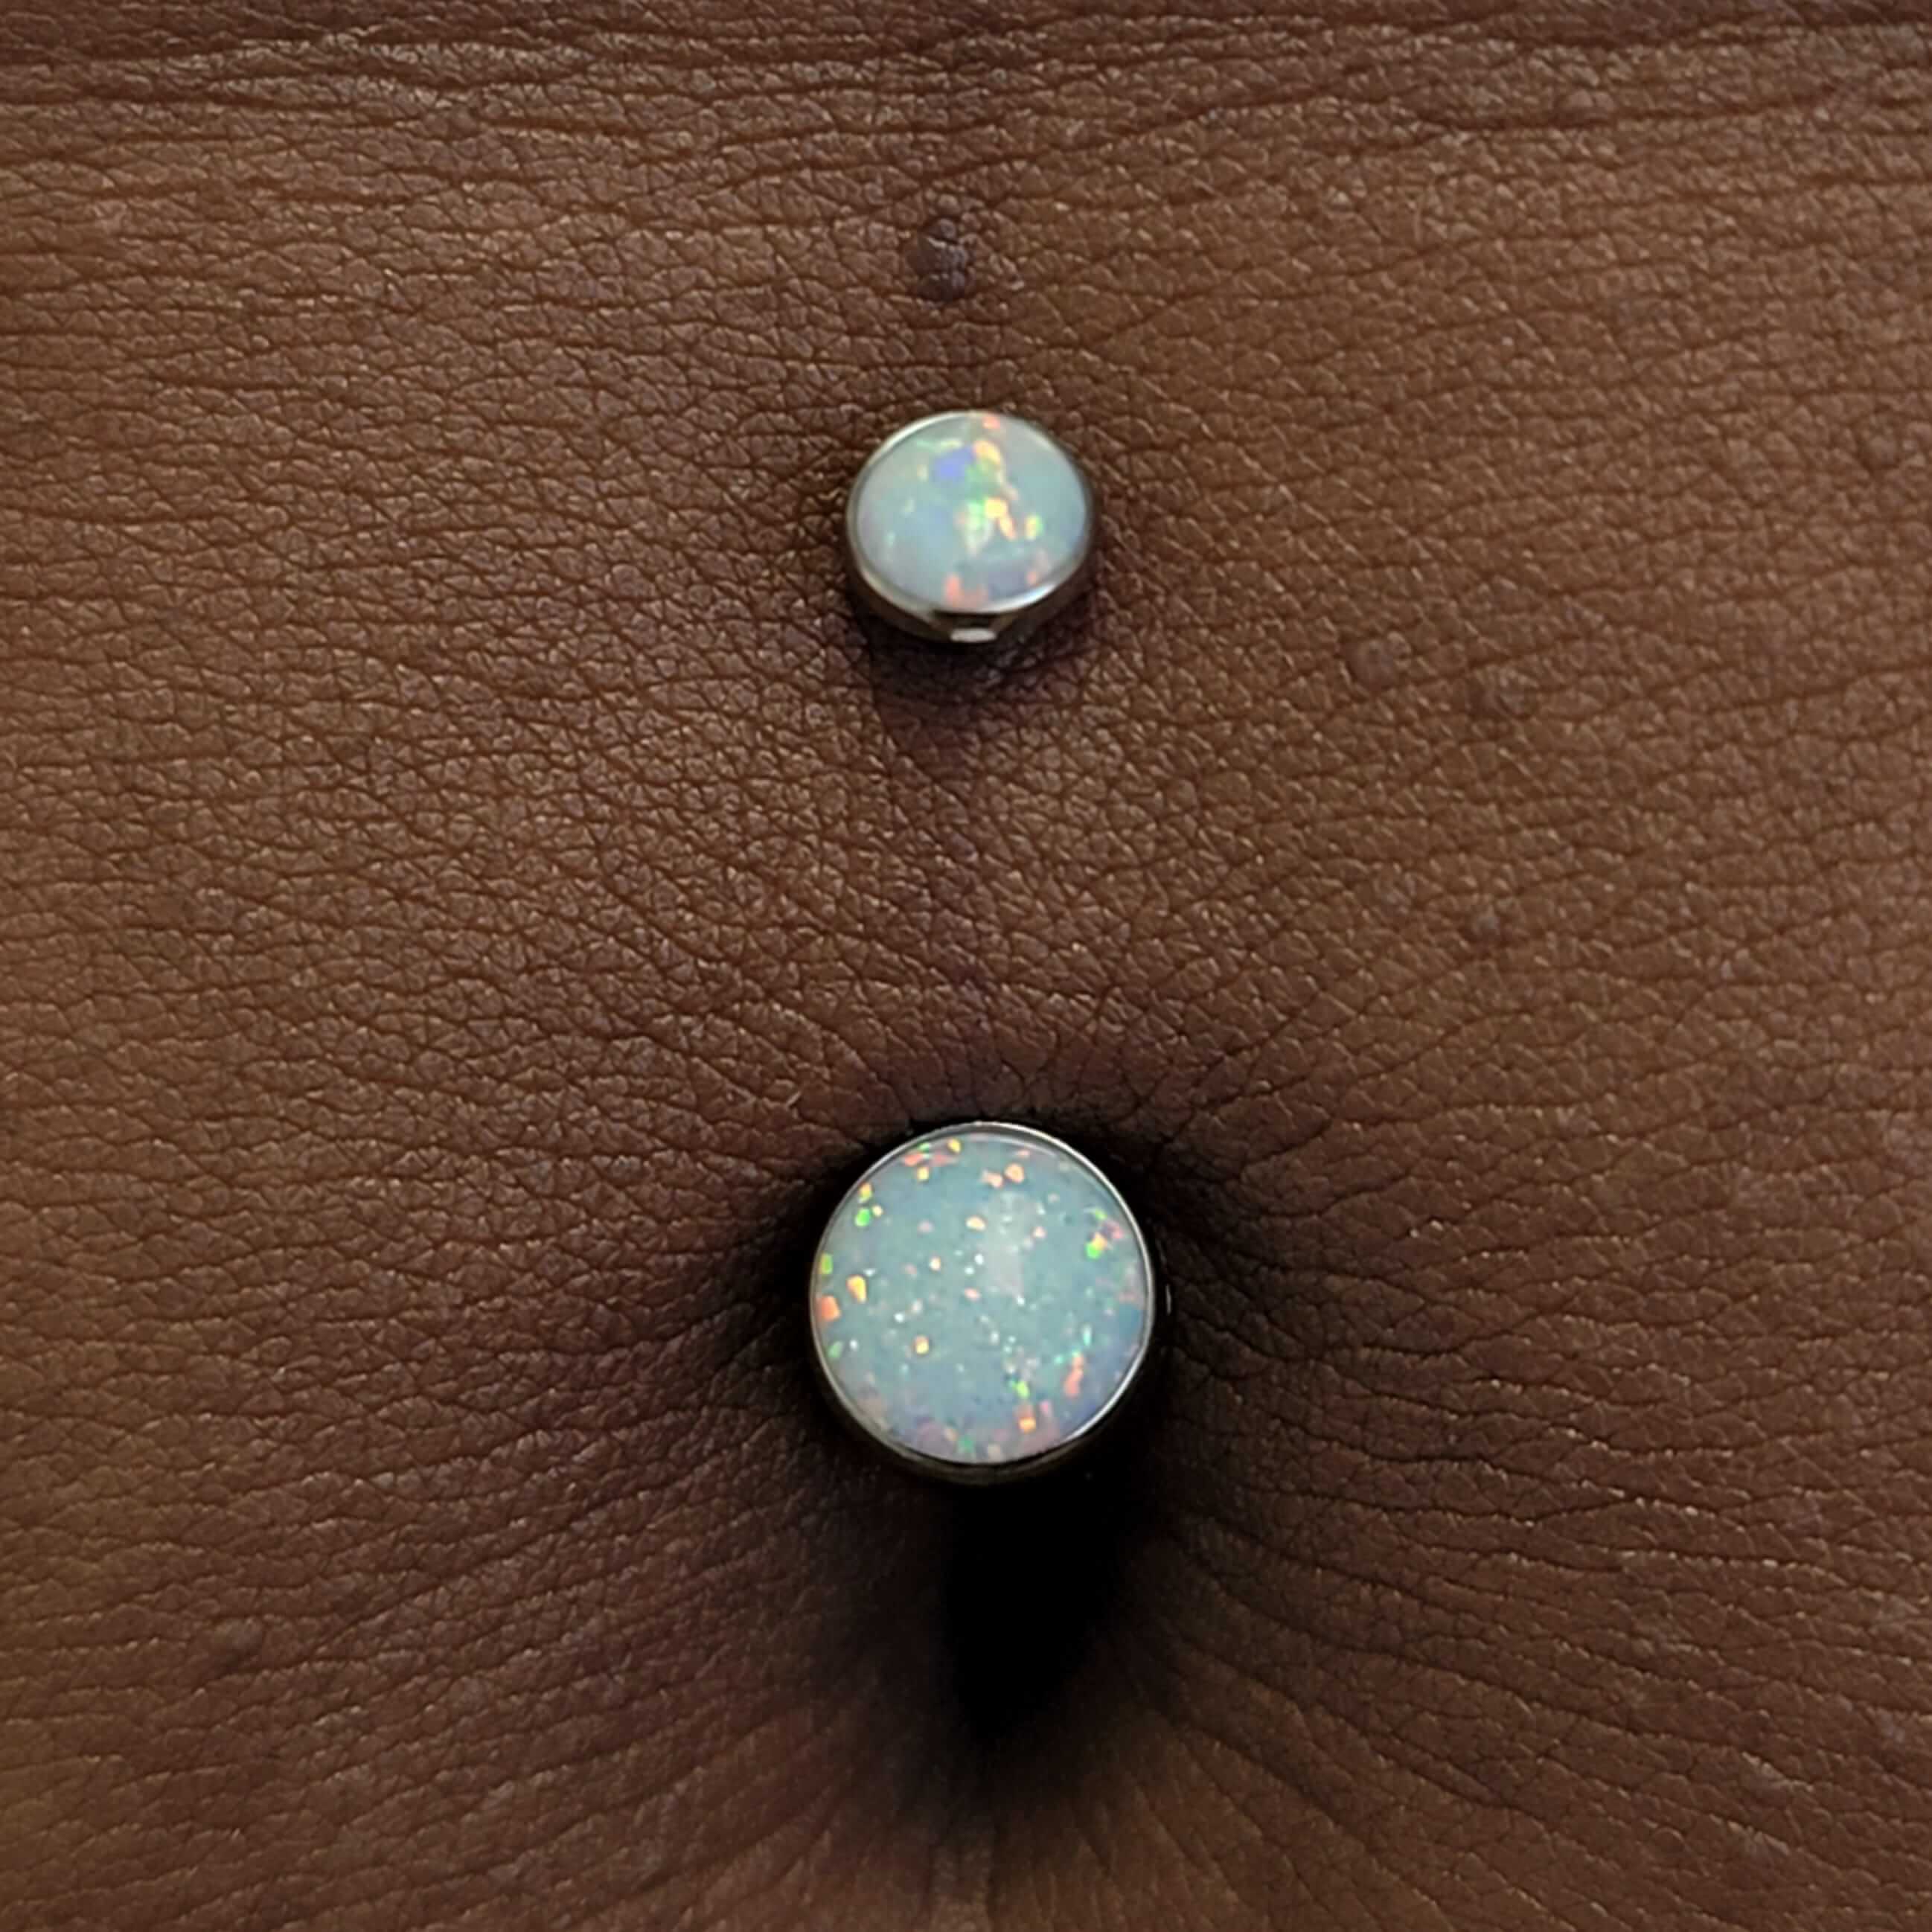 Navel piercing with implant grade titanium and white opals